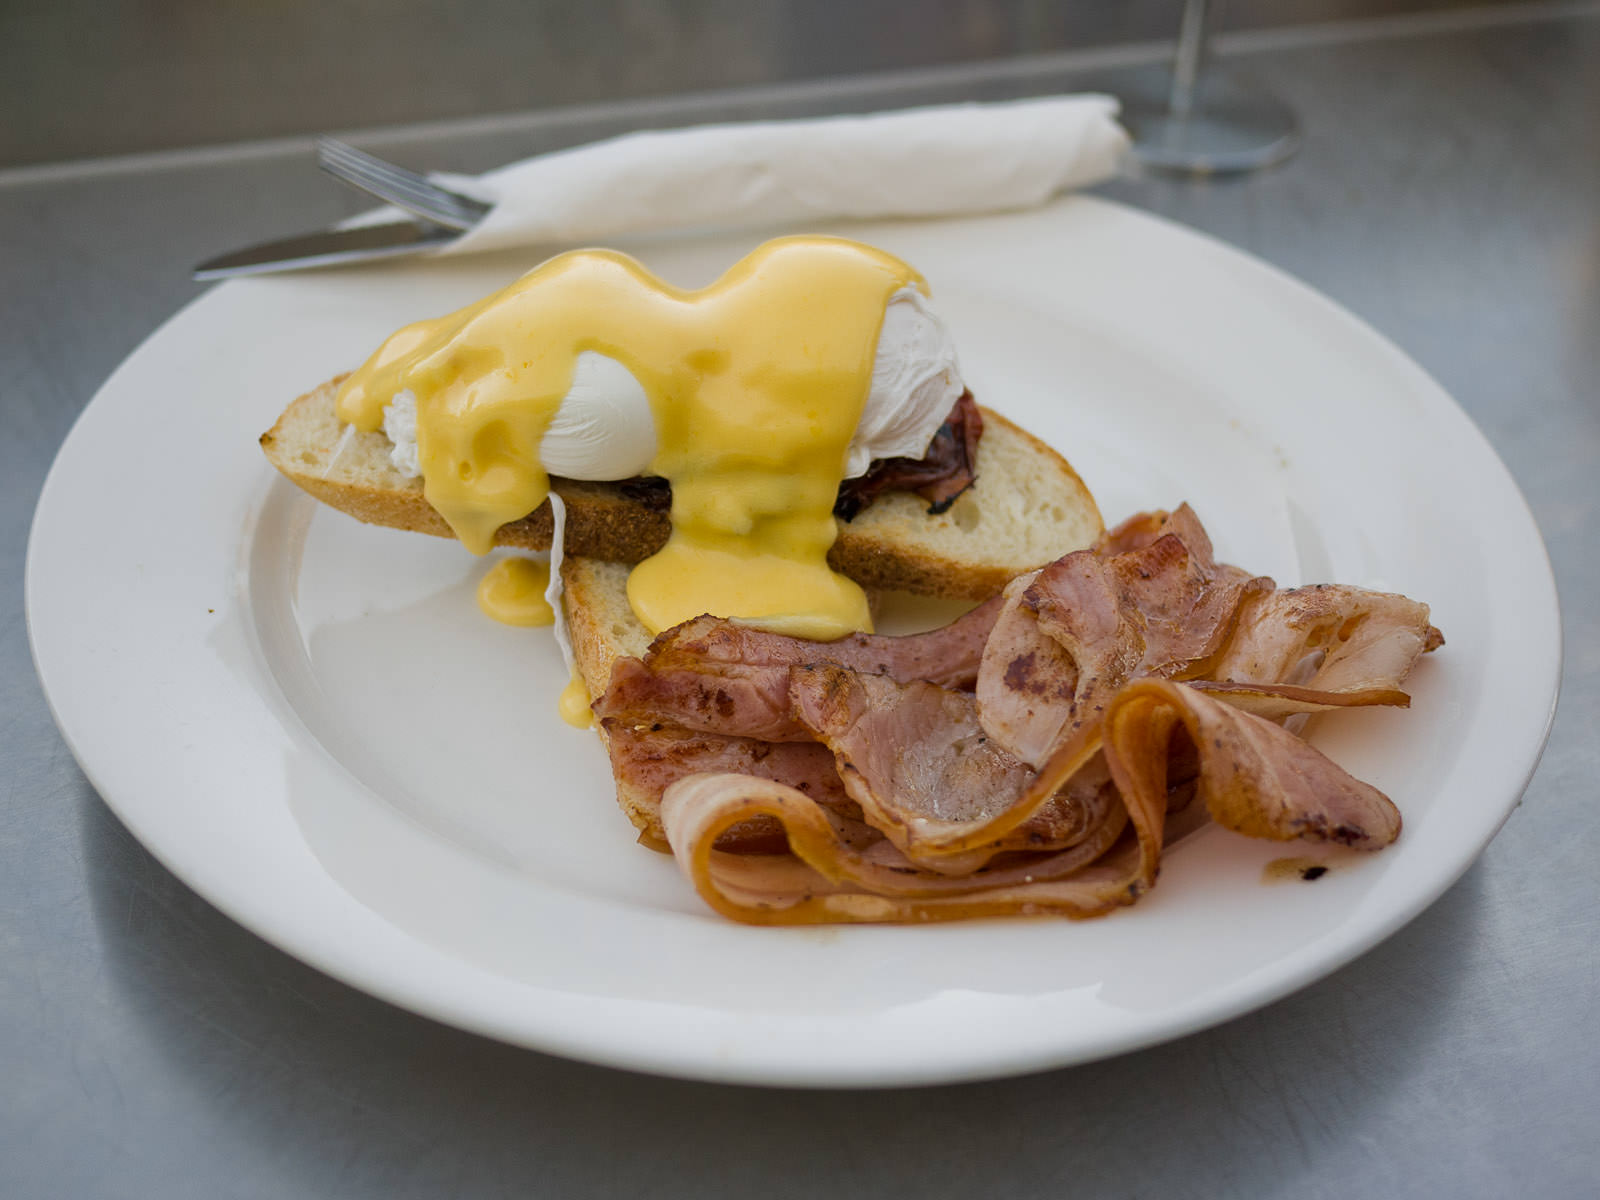 French - poached eggs, Brie, tomato, hollandaise (AU$19), side of bacon (AU$4)